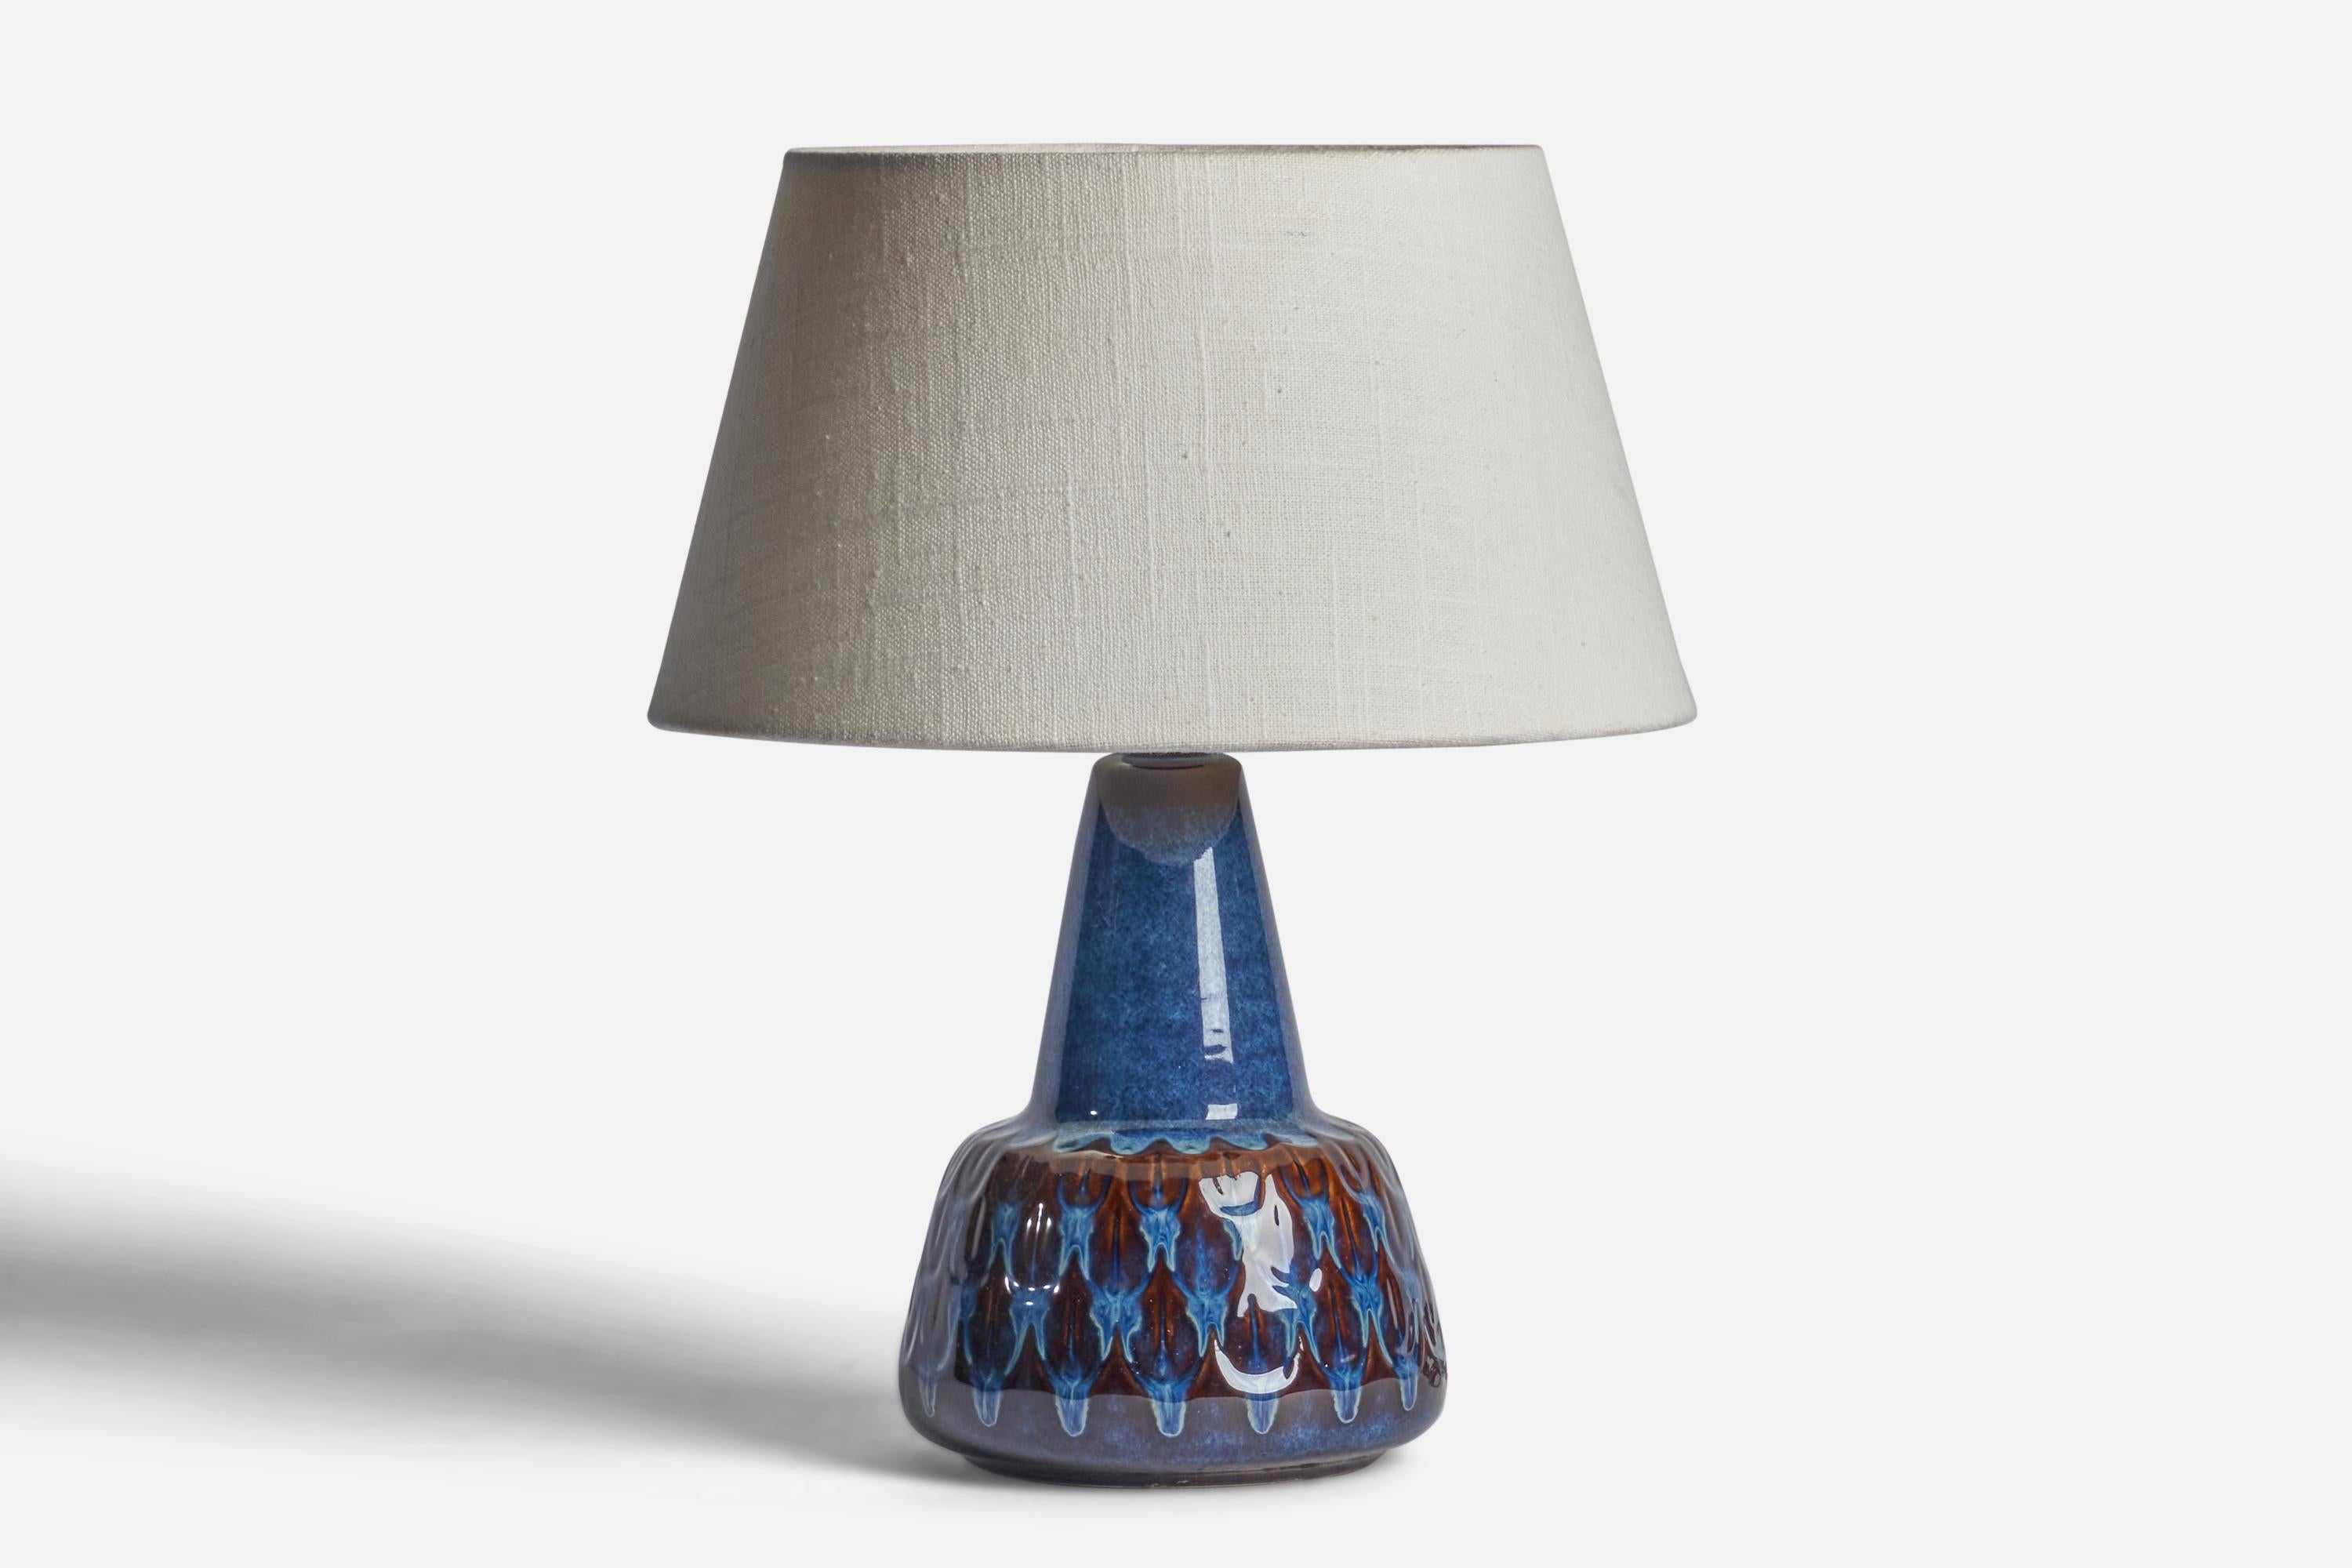 A blue-glazed stoneware table lamp designed and produced by Søholm, Bornholm, Denmark, 1960s.

Dimensions of Lamp (inches): 9.75” H x 5.75” Diameter
Dimensions of Shade (inches): 7” Top Diameter x 10” Bottom Diameter x 5.5” H 
Dimensions of Lamp